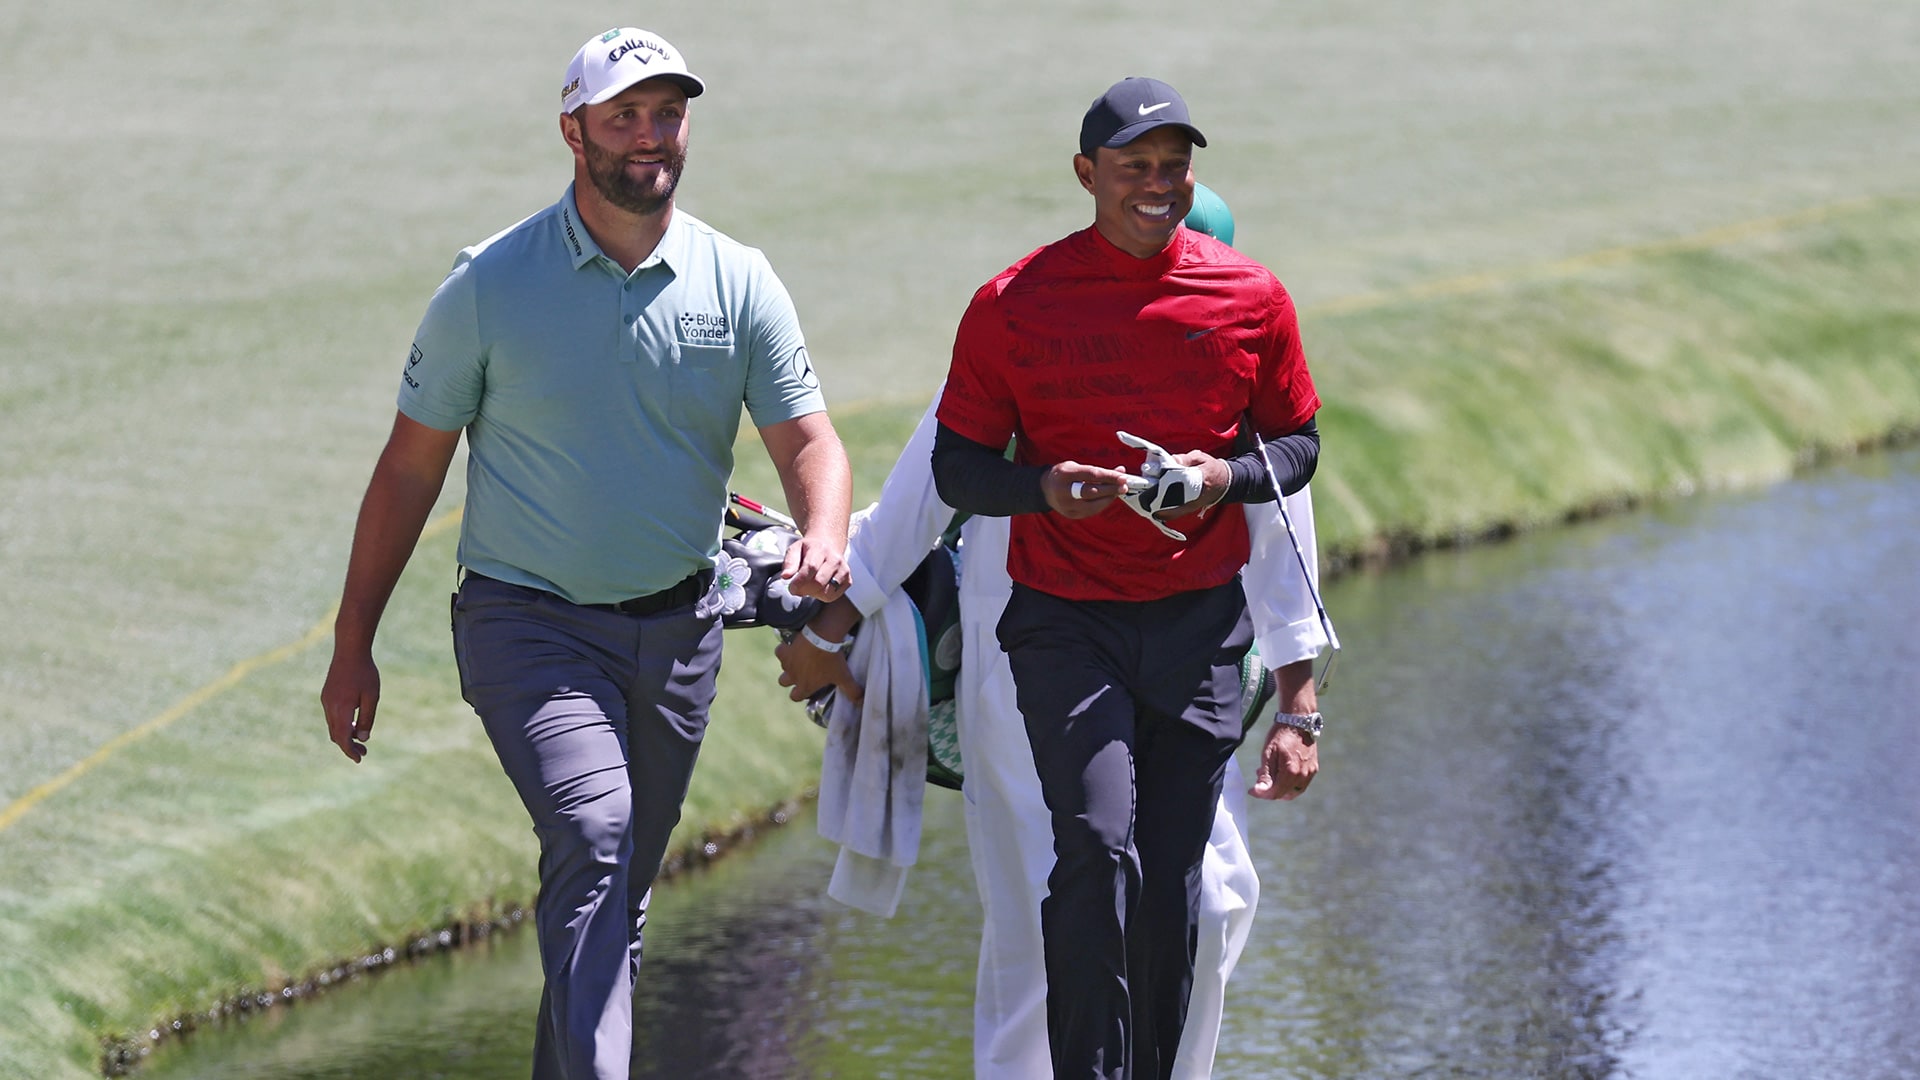 ‘He can’t walk any faster’: Jon Rahm details being on the clock with Tiger Woods Sunday at Masters